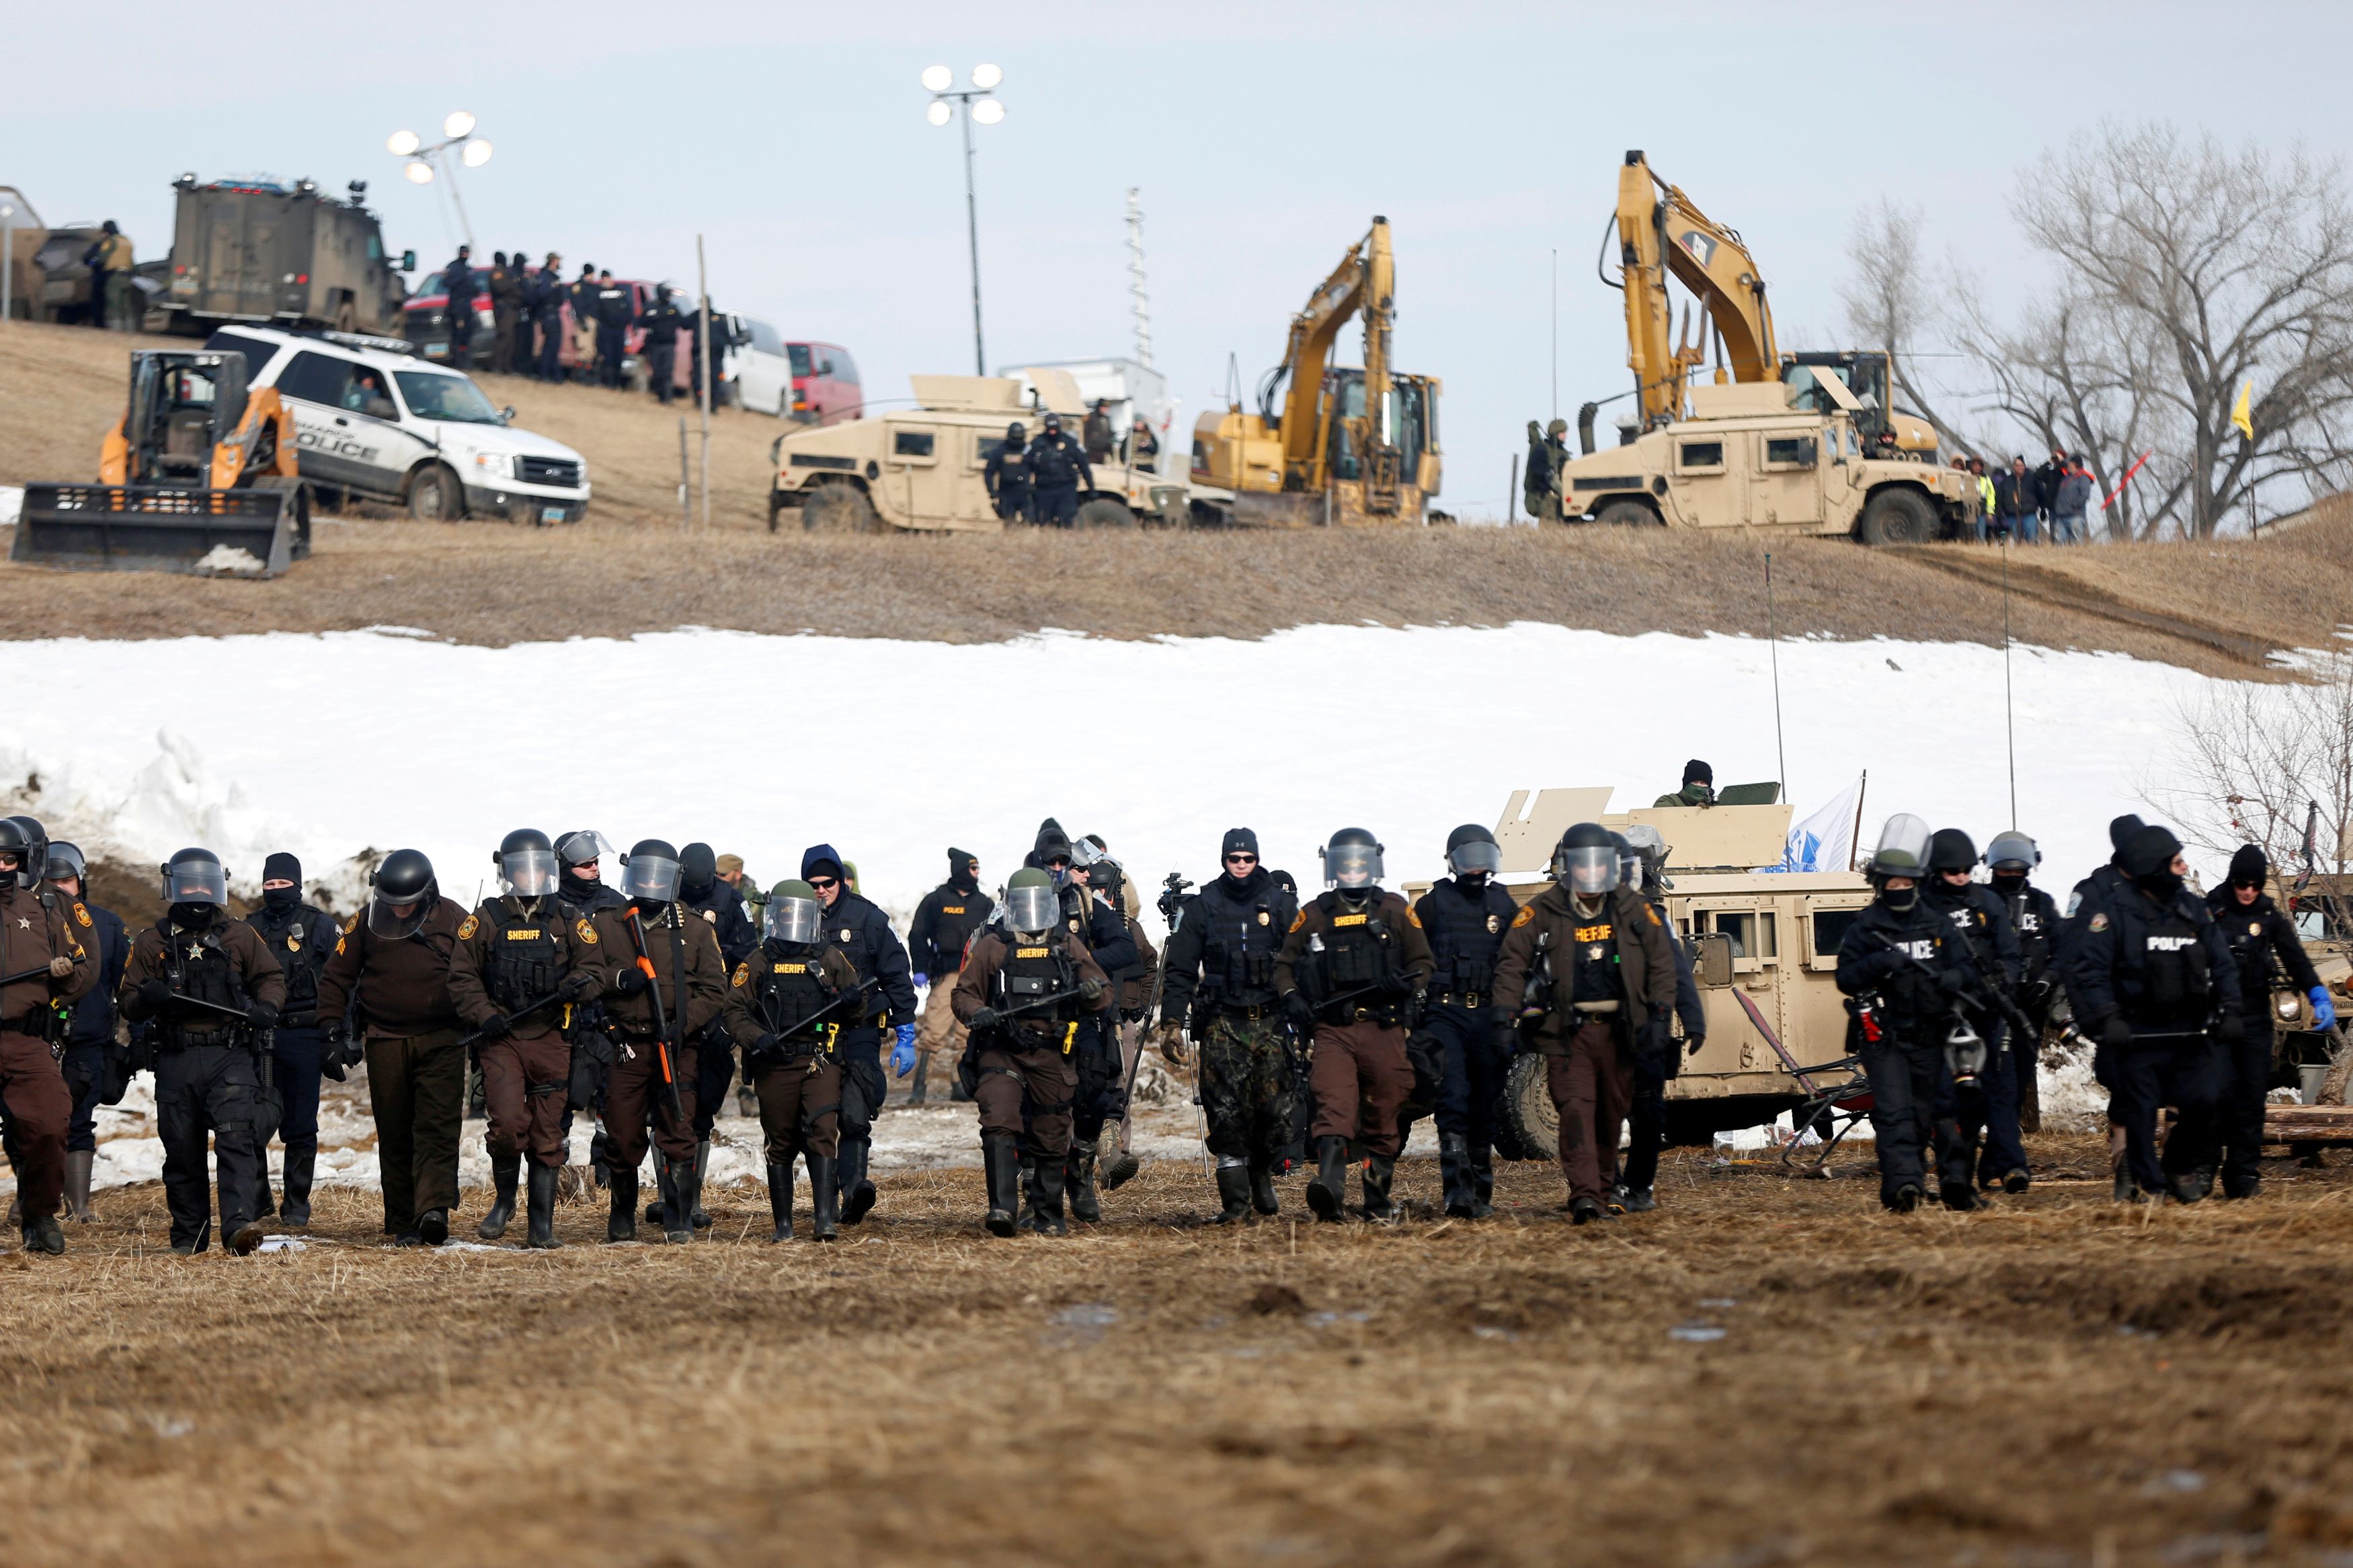 Law enforcement officers advance into the main opposition camp against the Dakota Access oil pipeline near Cannon Ball